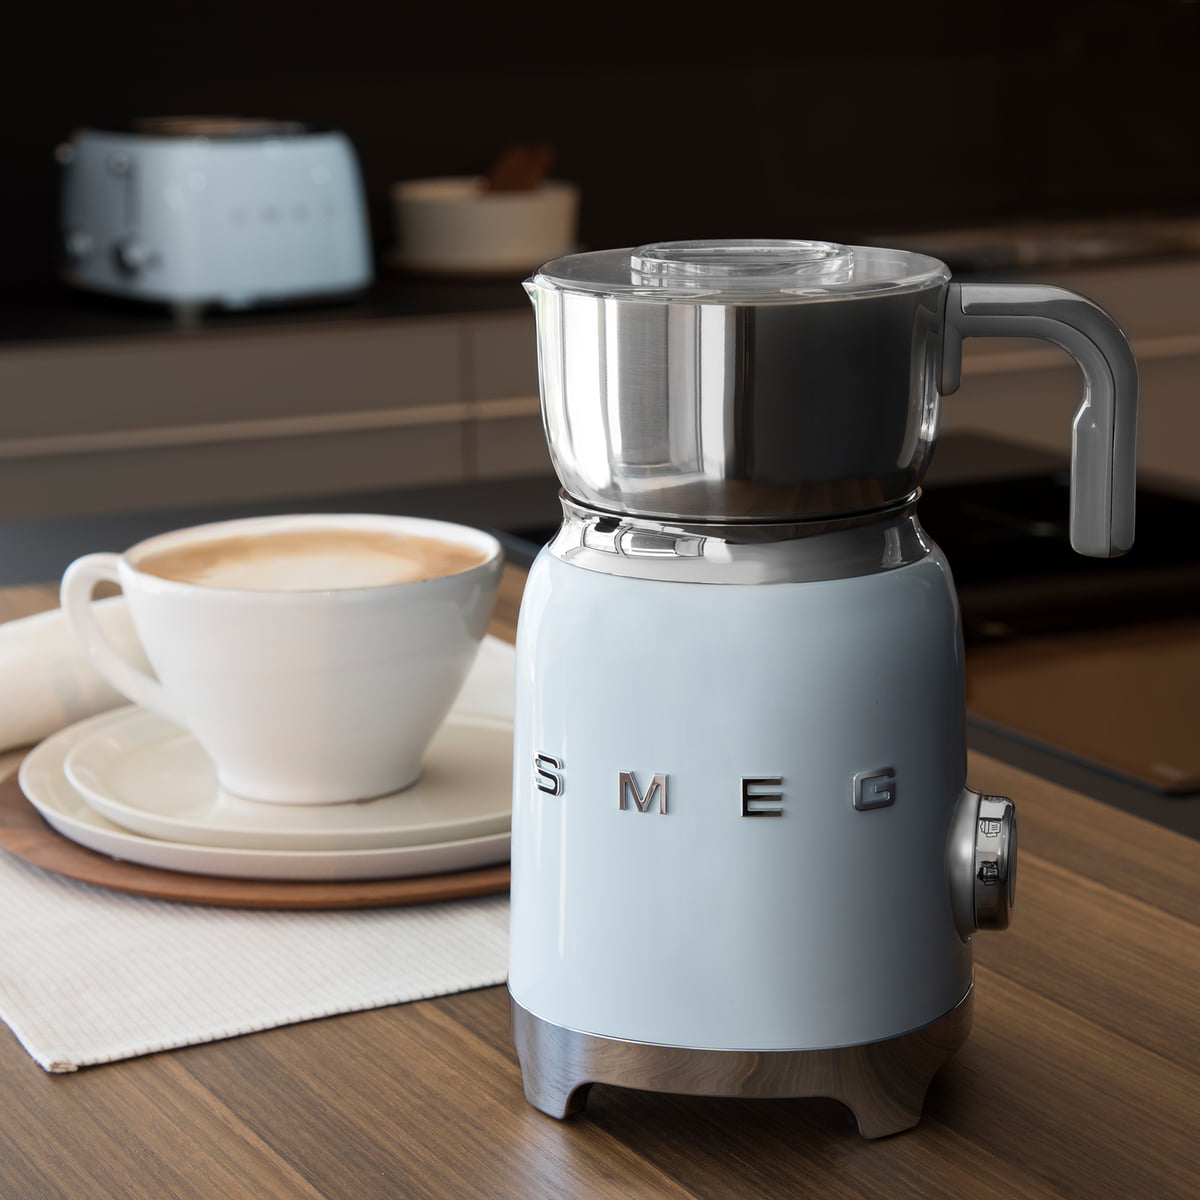 Smeg - Milk frother MFF11